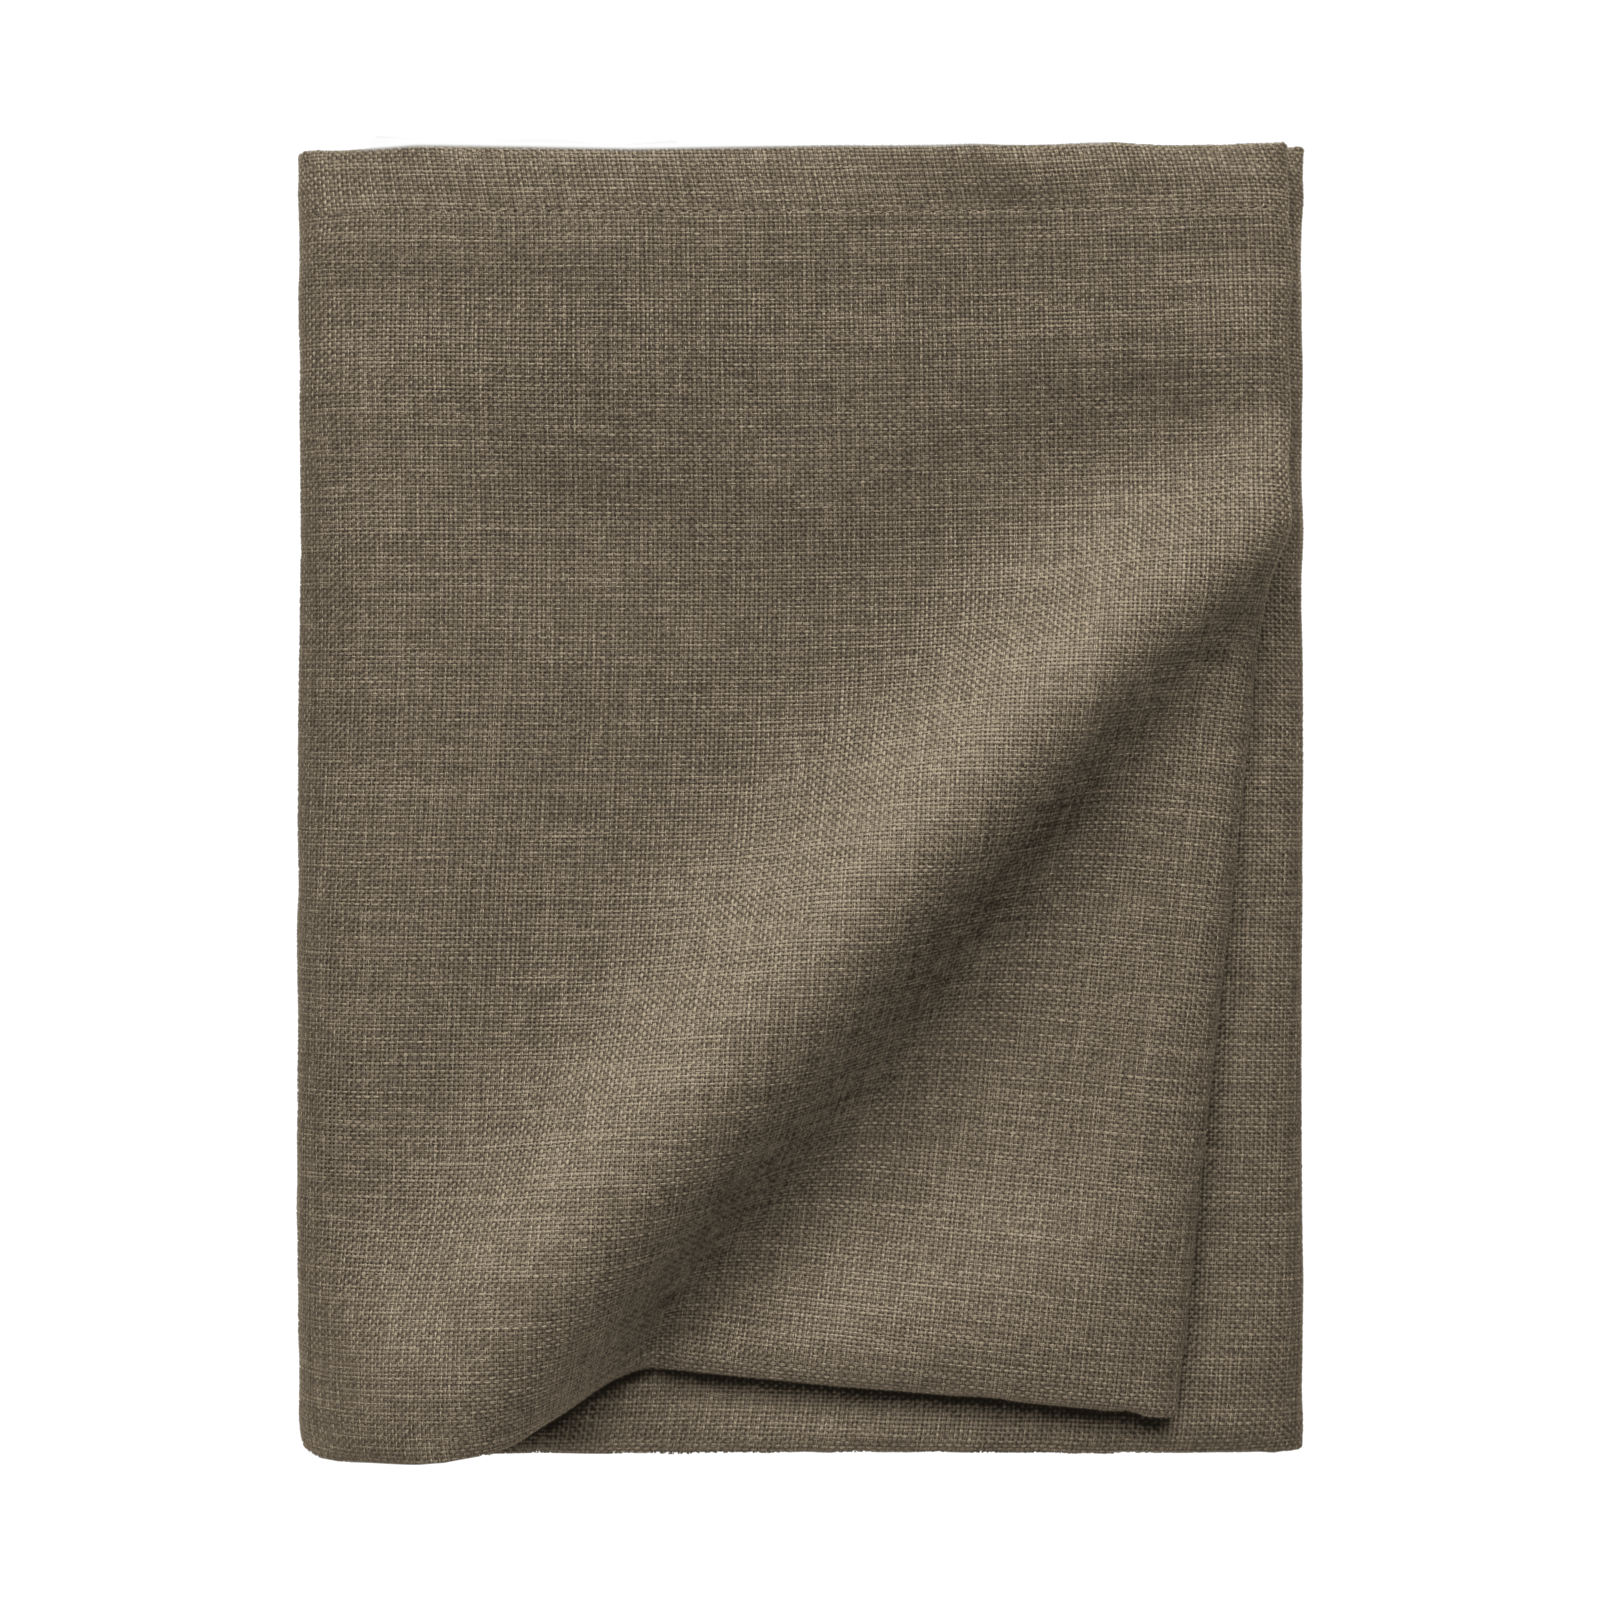 Größe: 85x 85 cm Farbe: taupe #farbe_taupe